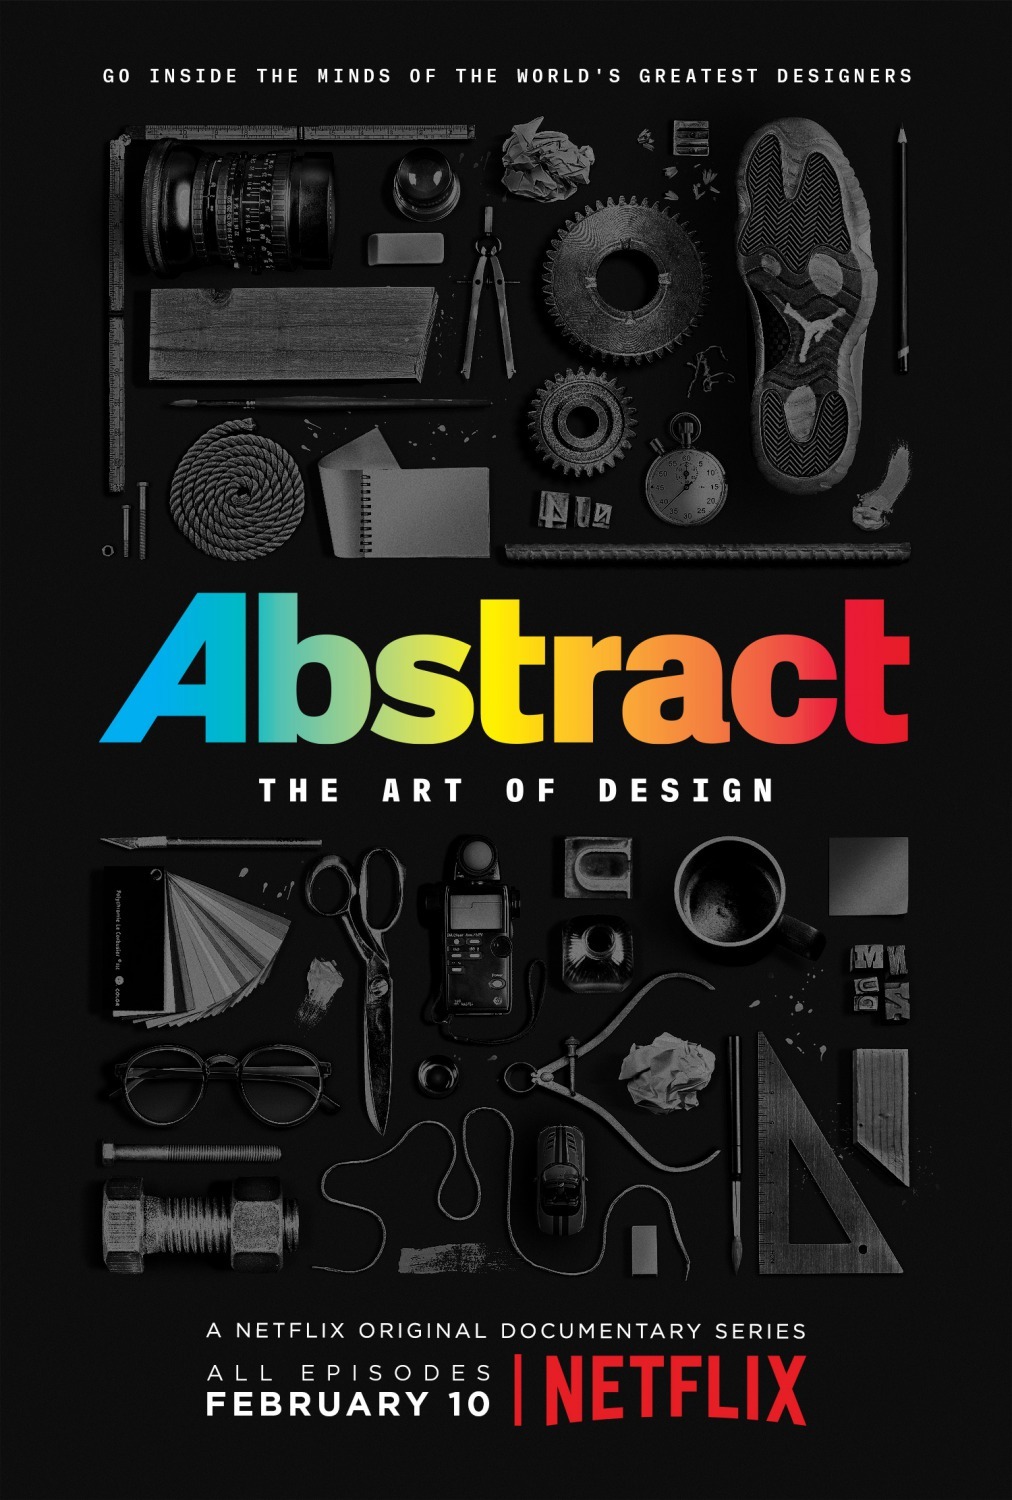 Abstract- The Art of Design - documentaire marketing